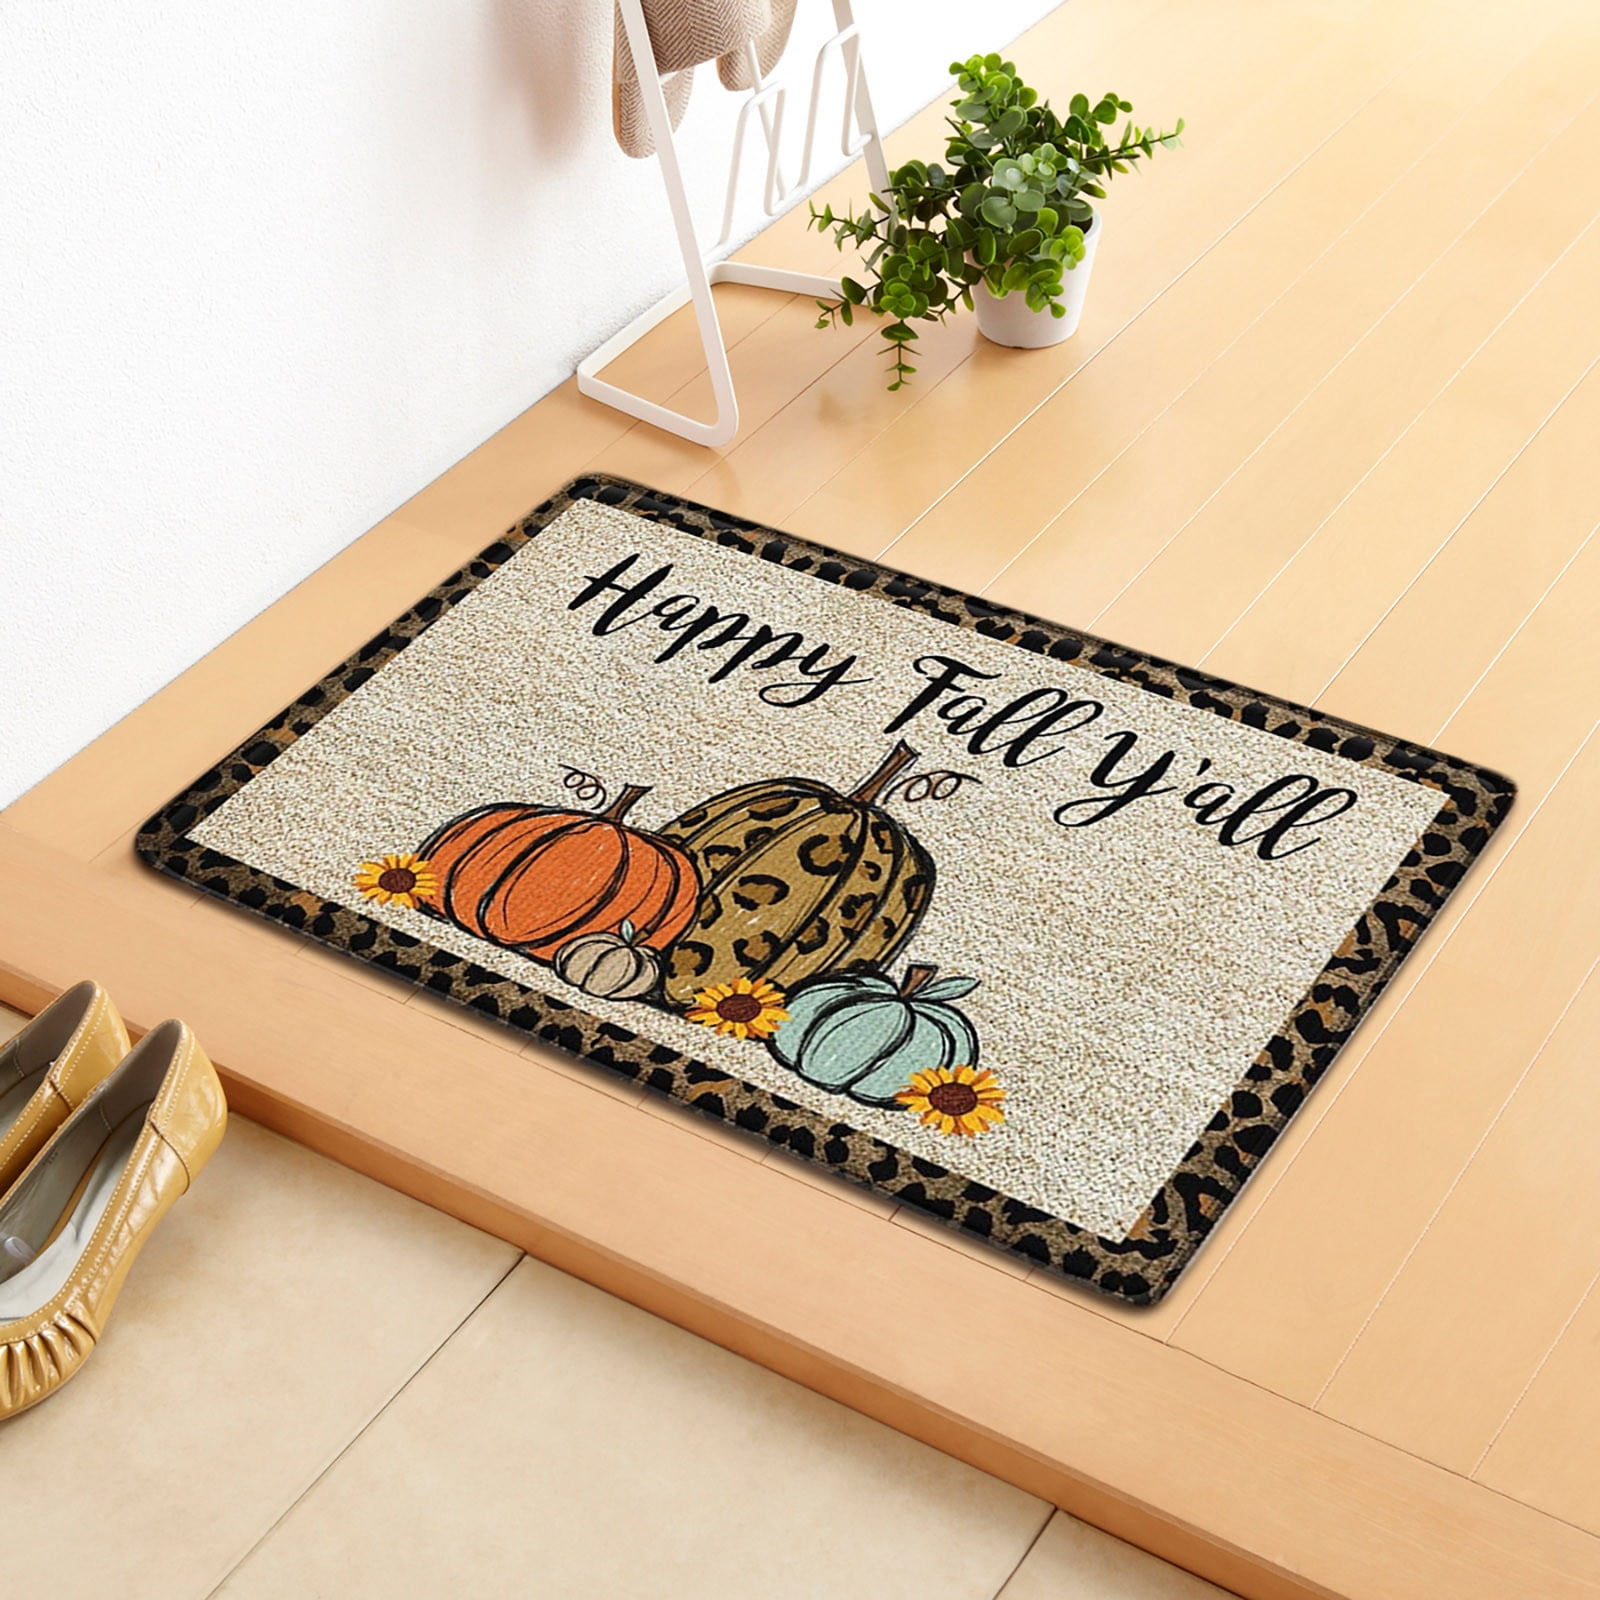  Fall Round Area Rug 4ft White Pumpkin Floor Carpets Indoor Floor  Area Mat Stain-Proof Mat Non-Skid Rugs for Living Room Dining Kitchen  Bedroom Nursery, Harvest Leaves Wheat Wooden Thanksgiving Decor 